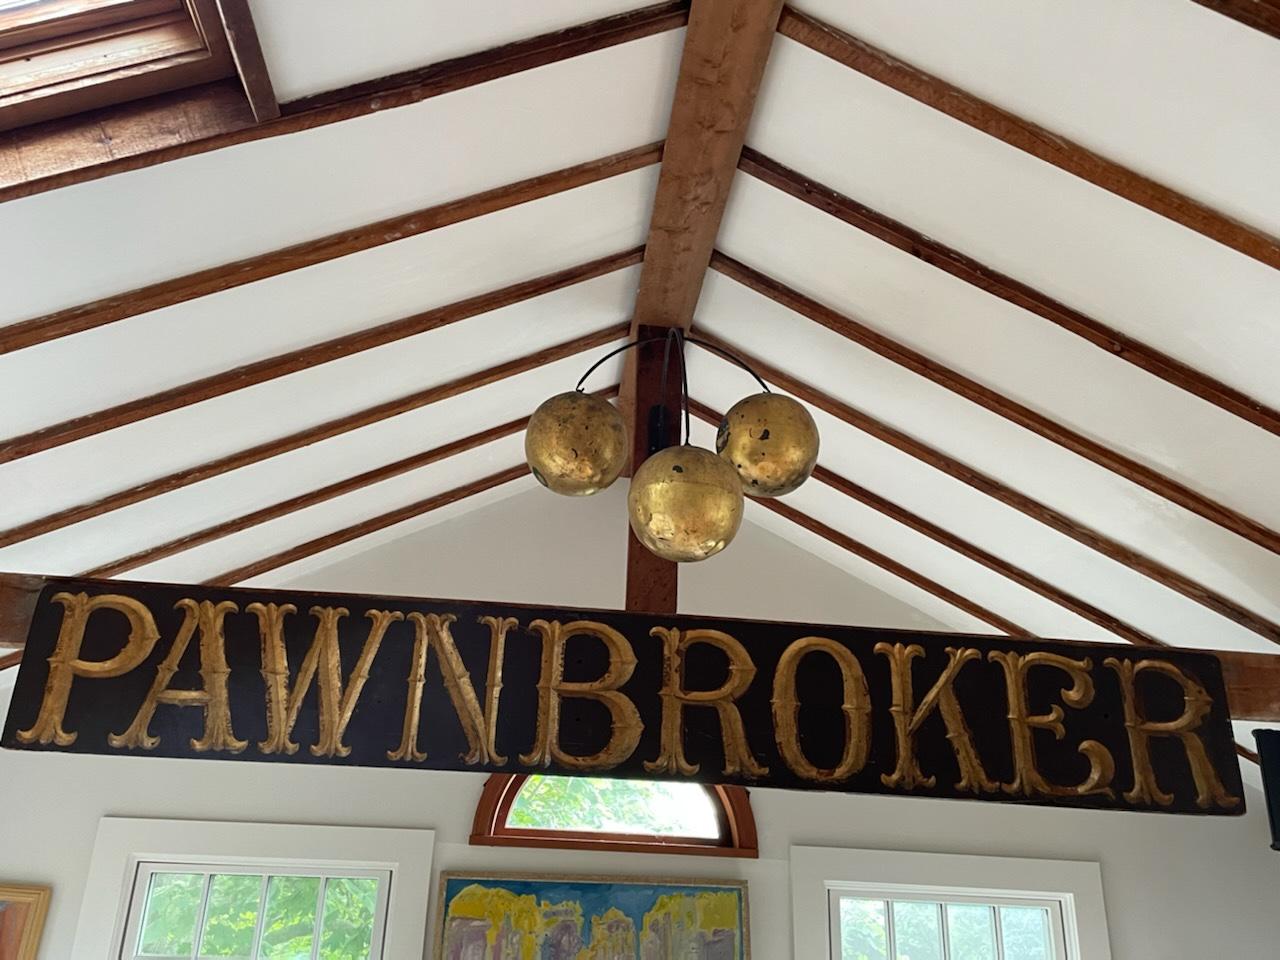 An impressive rare and monumental in scale folk art pawnbroker trade sign with accompanying trio of giltwood spheres which represent the universal symbol for the pawnbroker trade.  Spheres are suspended by a wrought iron backplate 8.5 